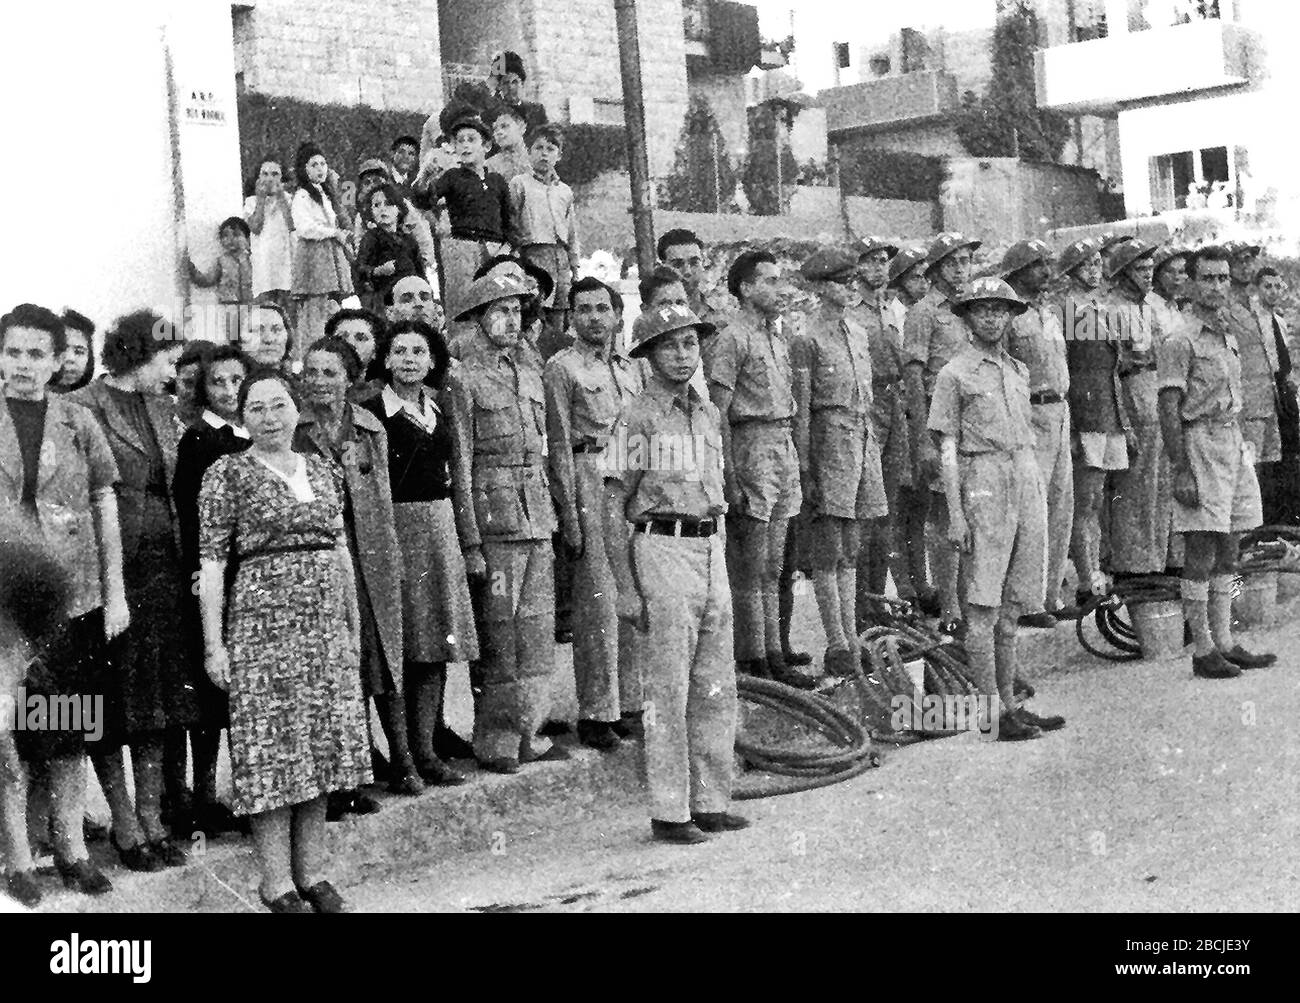 'English: Jewish Civil Defense group in Jerusalem in 1942 (then British Mandatory Palestine). The group served as ARP Fire Wardens, equipped with water hoses and buckets, some wearing FW (Fire Watcher) Brodie helmets. Men are in uniform while women wear plain clothes. Composer Josef Tal stands next to the woman with a black sweater.   Public domainPublic domainfalsefalse      This work or image is now in the public domain because its term of copyright has expired in Israel (details).  According to Israel's copyright statute from 2007 (translation), a work is released to the public domain on 1 Stock Photo